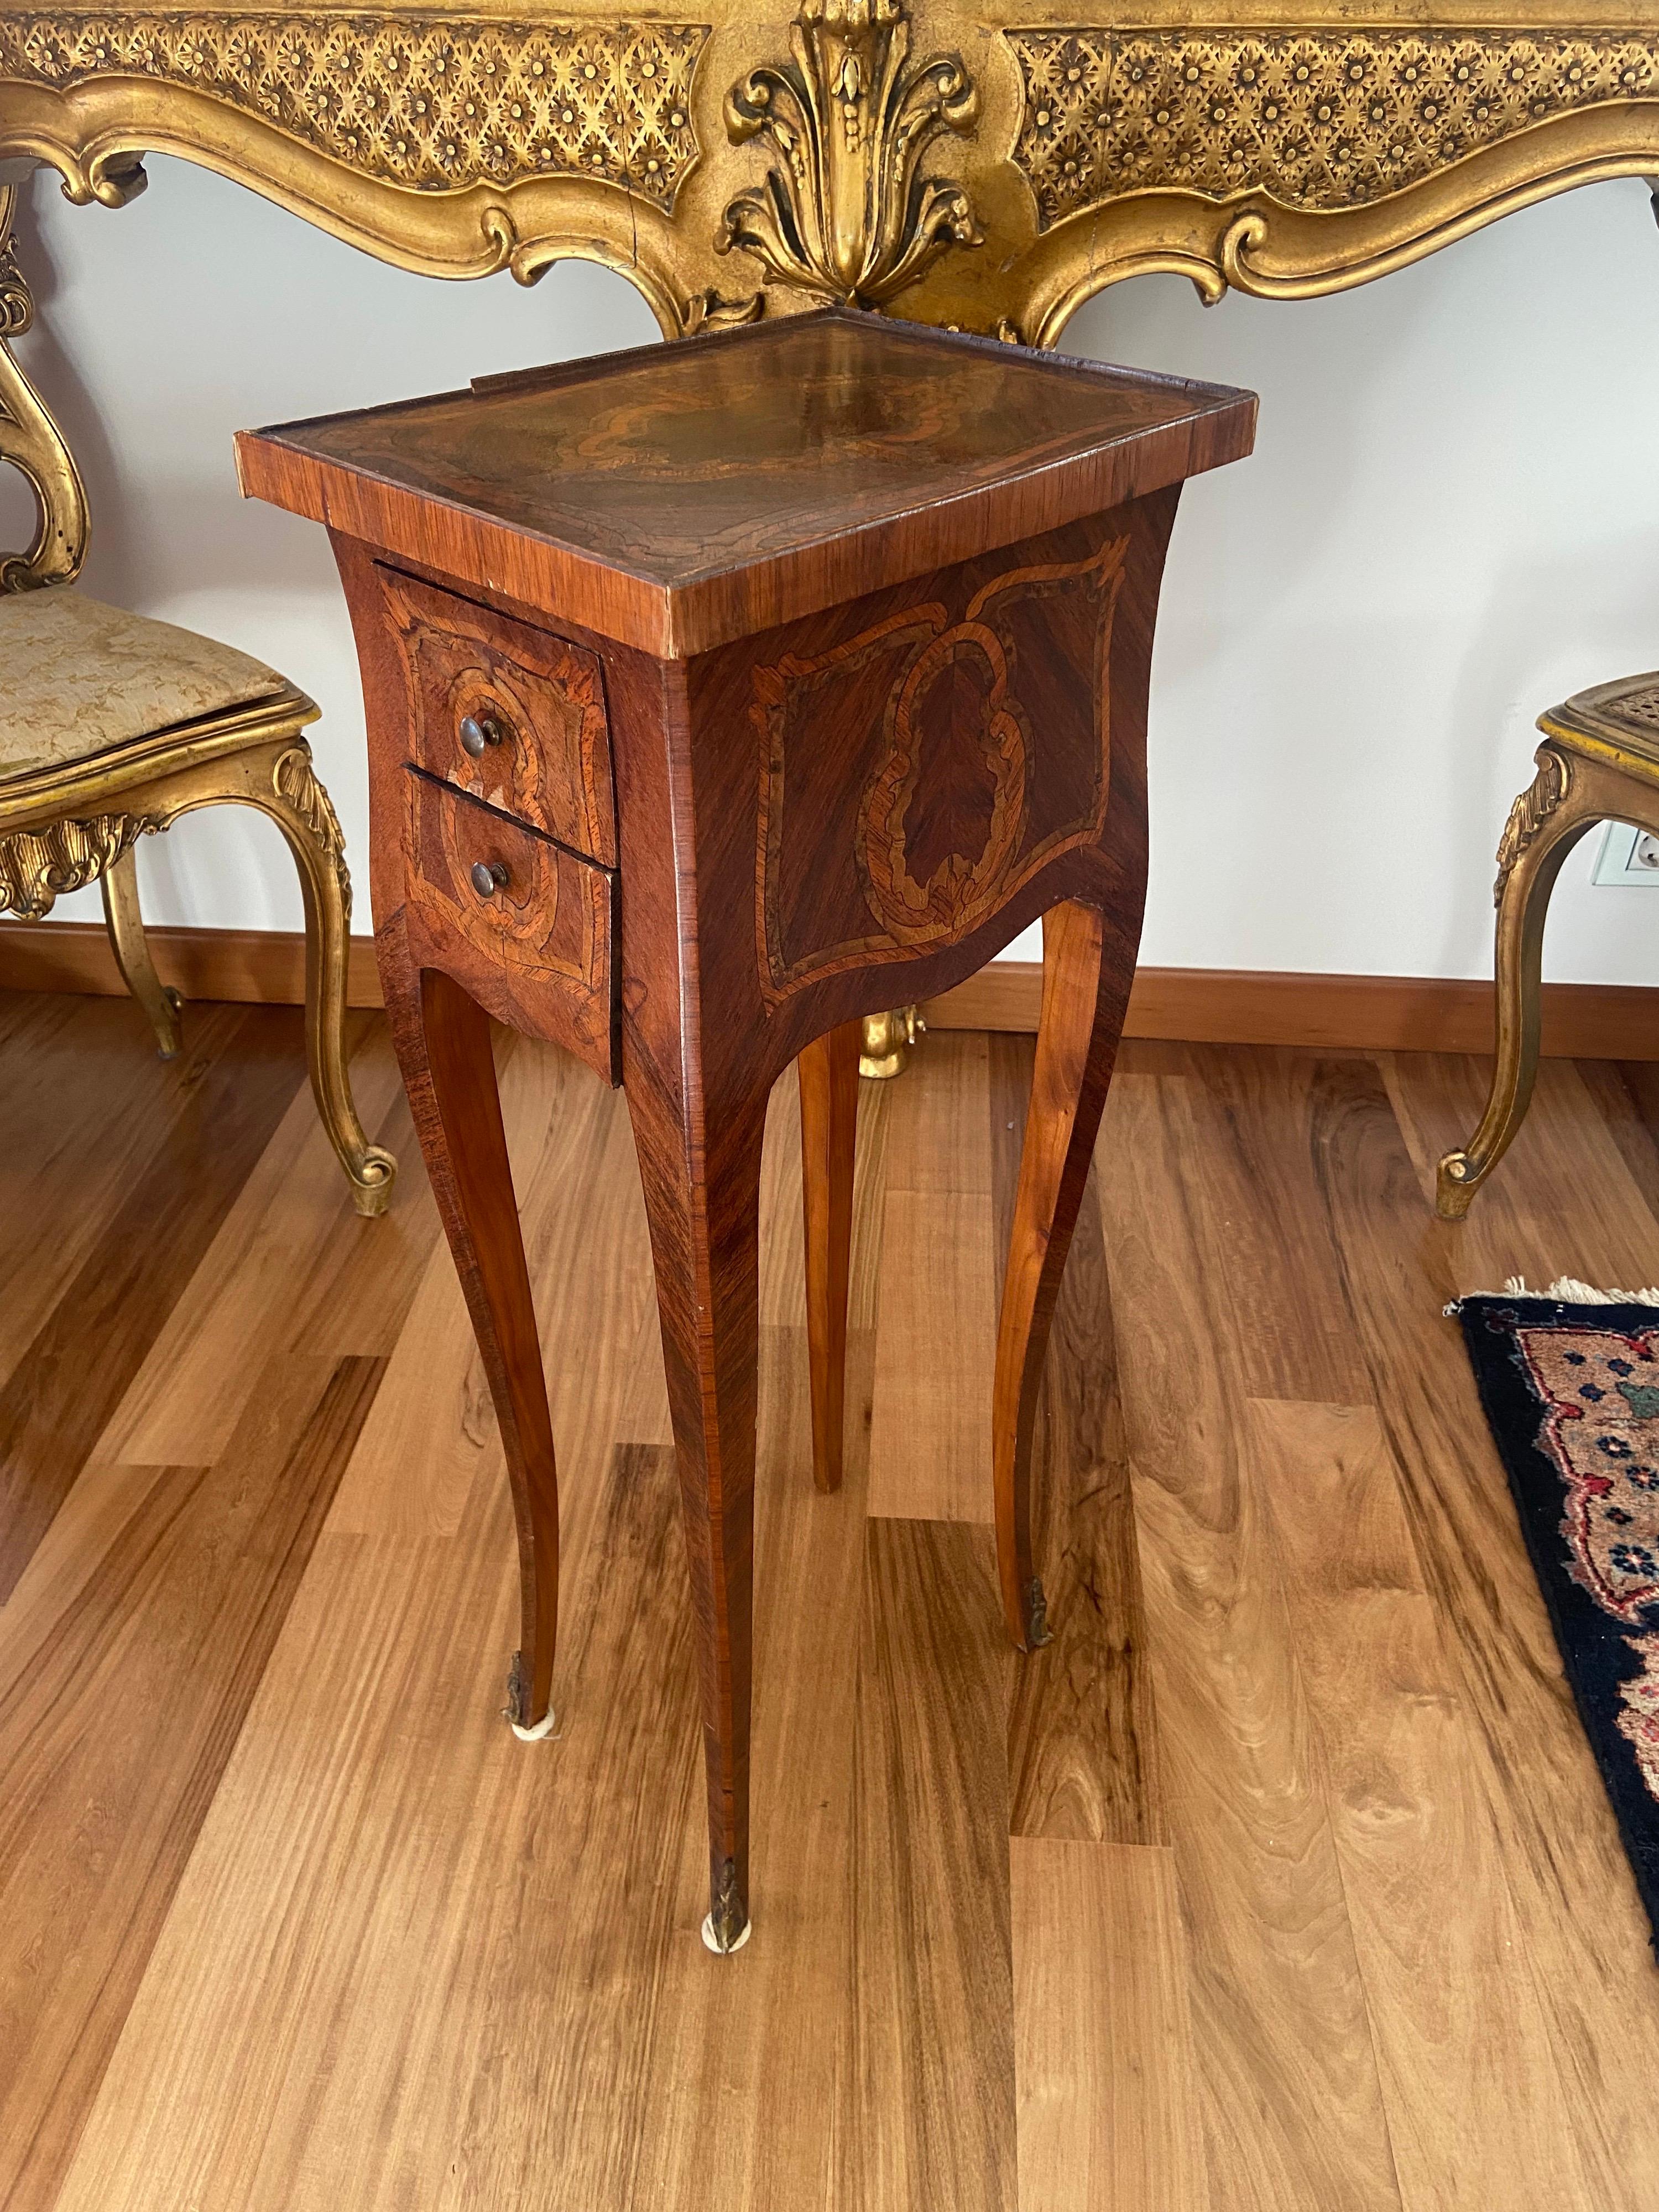 19th century French Louis XV style marquetry side table with two elegant side drawers, resting on long legs. There is a small hidden writing shelf right under the top on the other side of the drawers.
France, circa 1880.